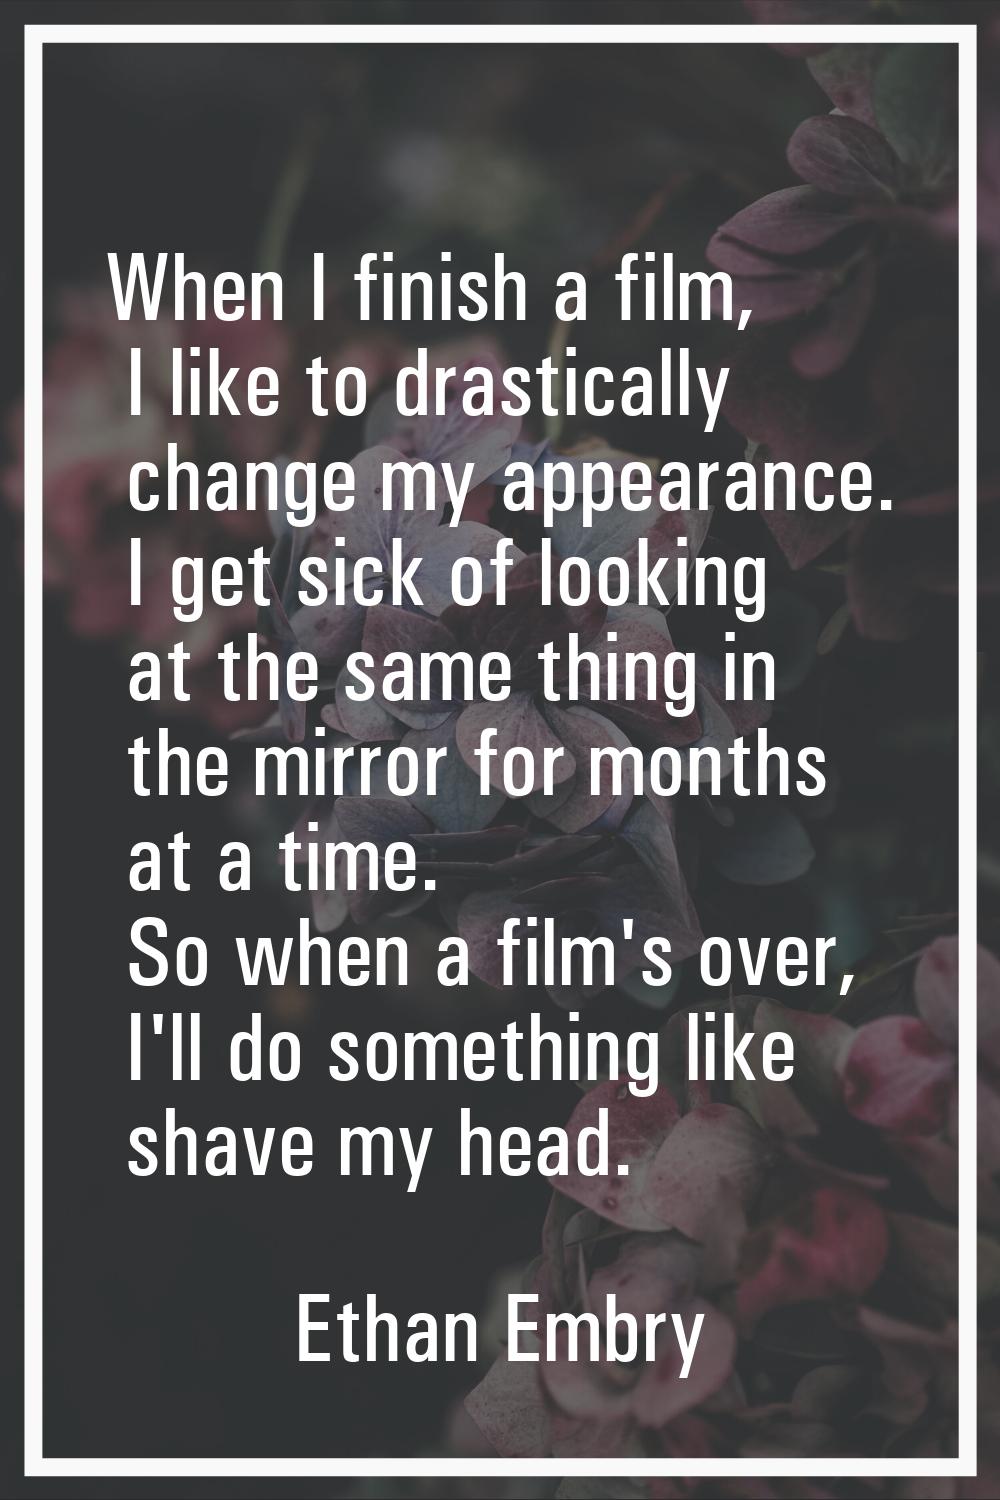 When I finish a film, I like to drastically change my appearance. I get sick of looking at the same